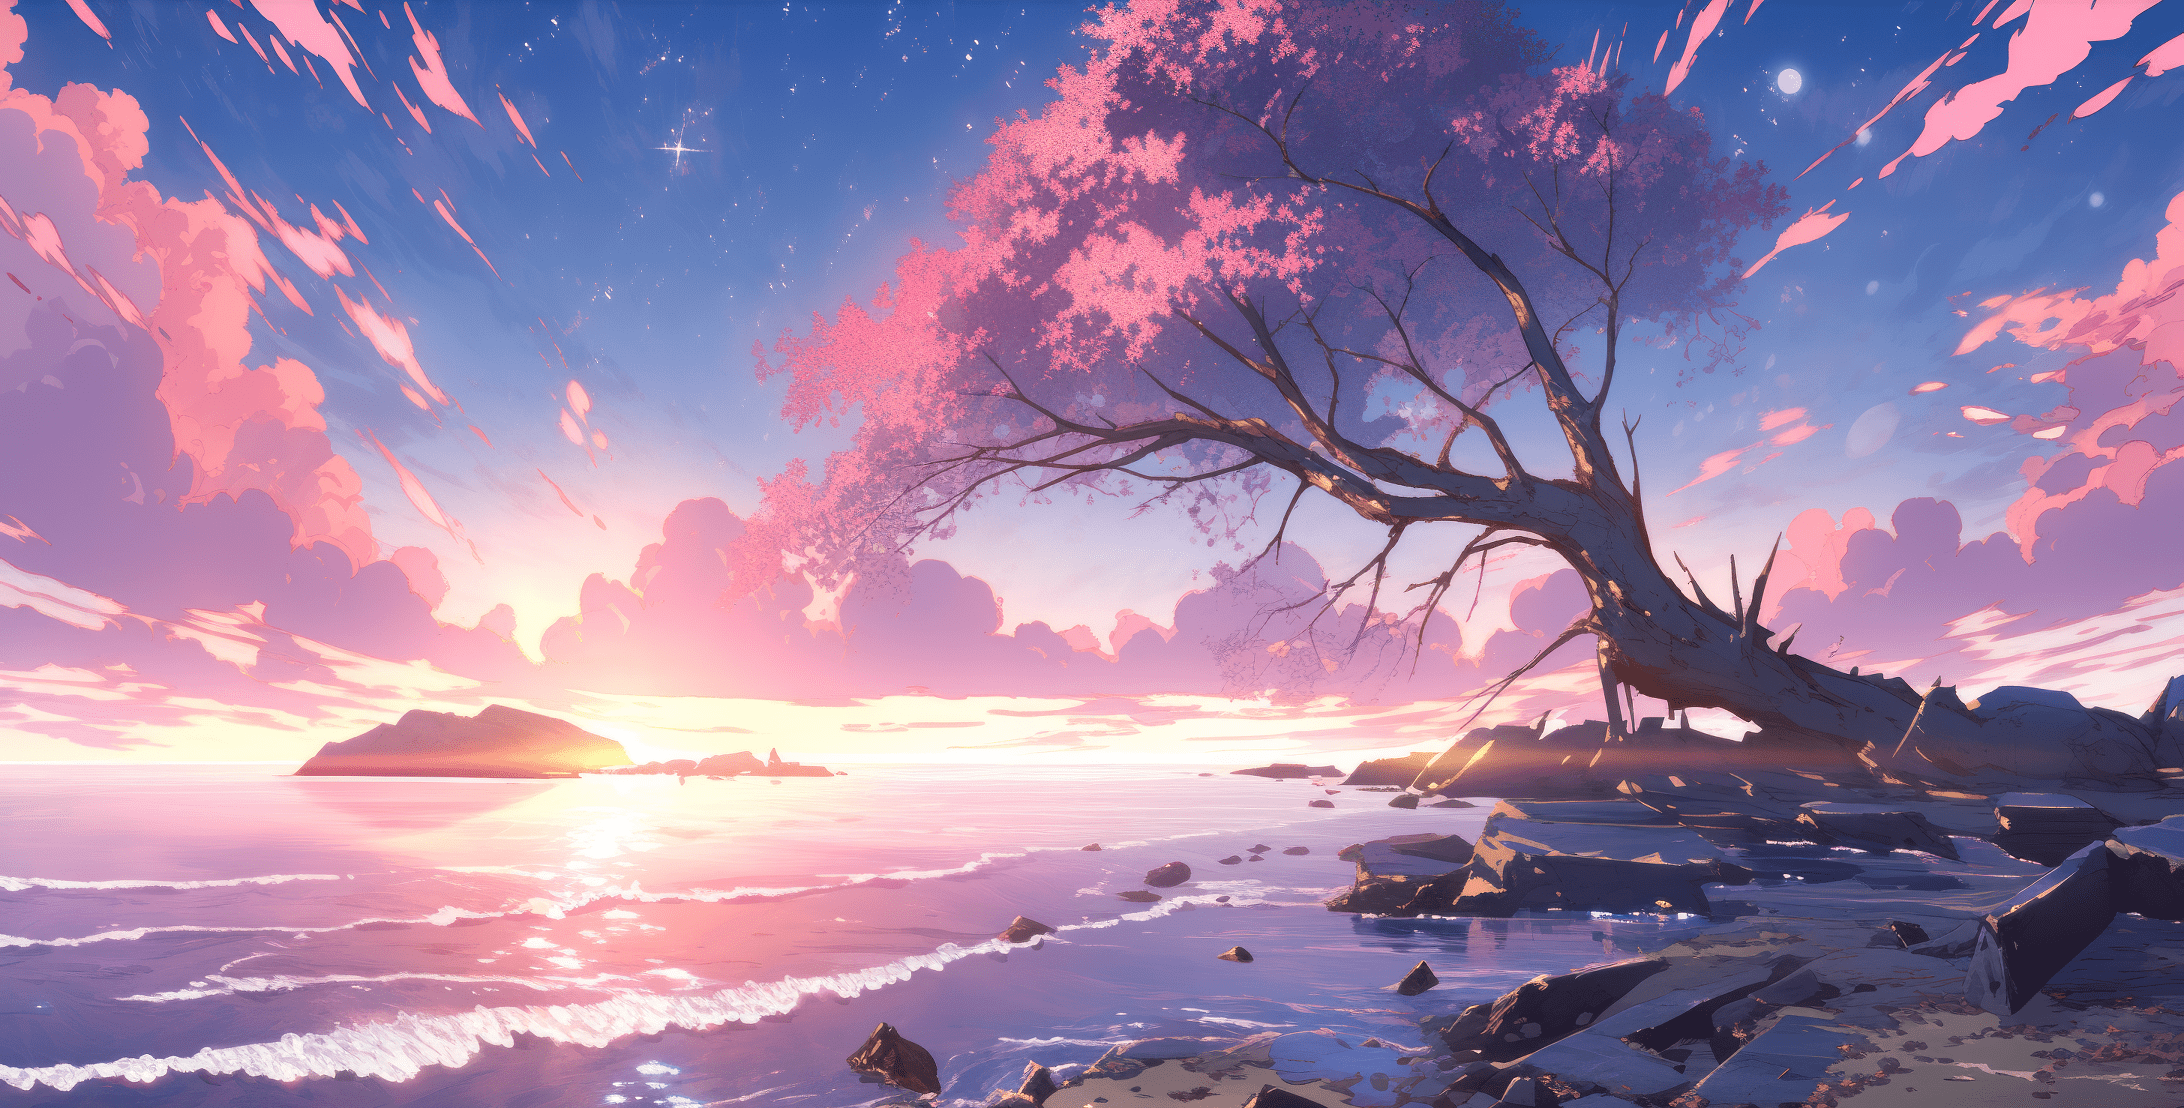 A digital painting of a tree on the beach with the sun setting in the background - Anime landscape, Windows 10, pink anime, landscape